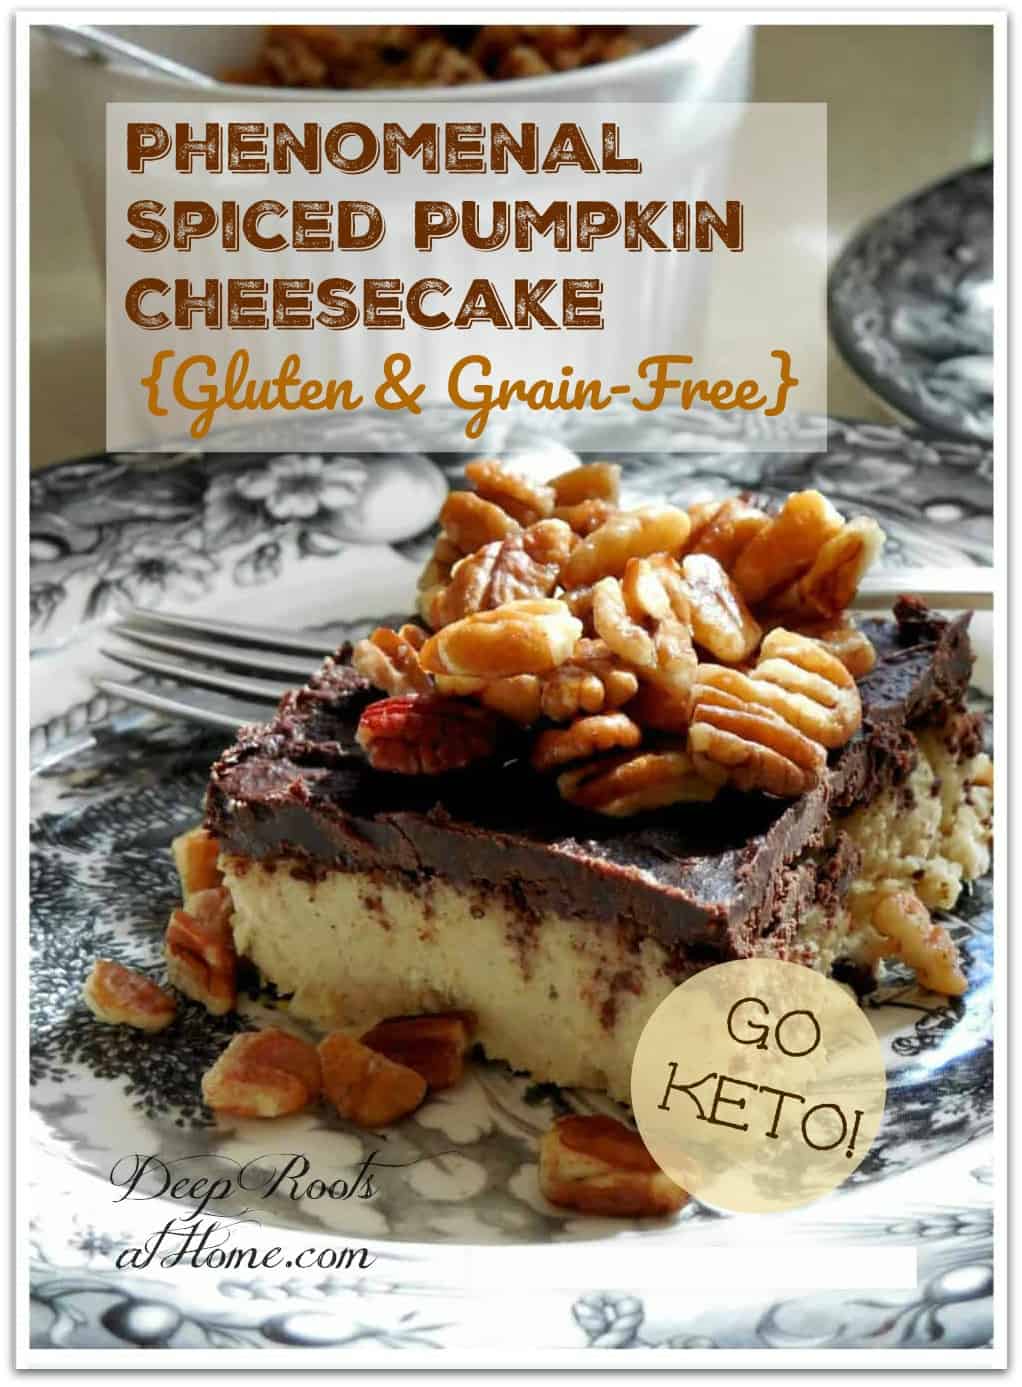 Phenomenal Spiced Pumpkin Cheesecake {Grain & Gluten-Free}. Pumpkin Cheesecake with a chocolate topping and toasted, salted pecans.